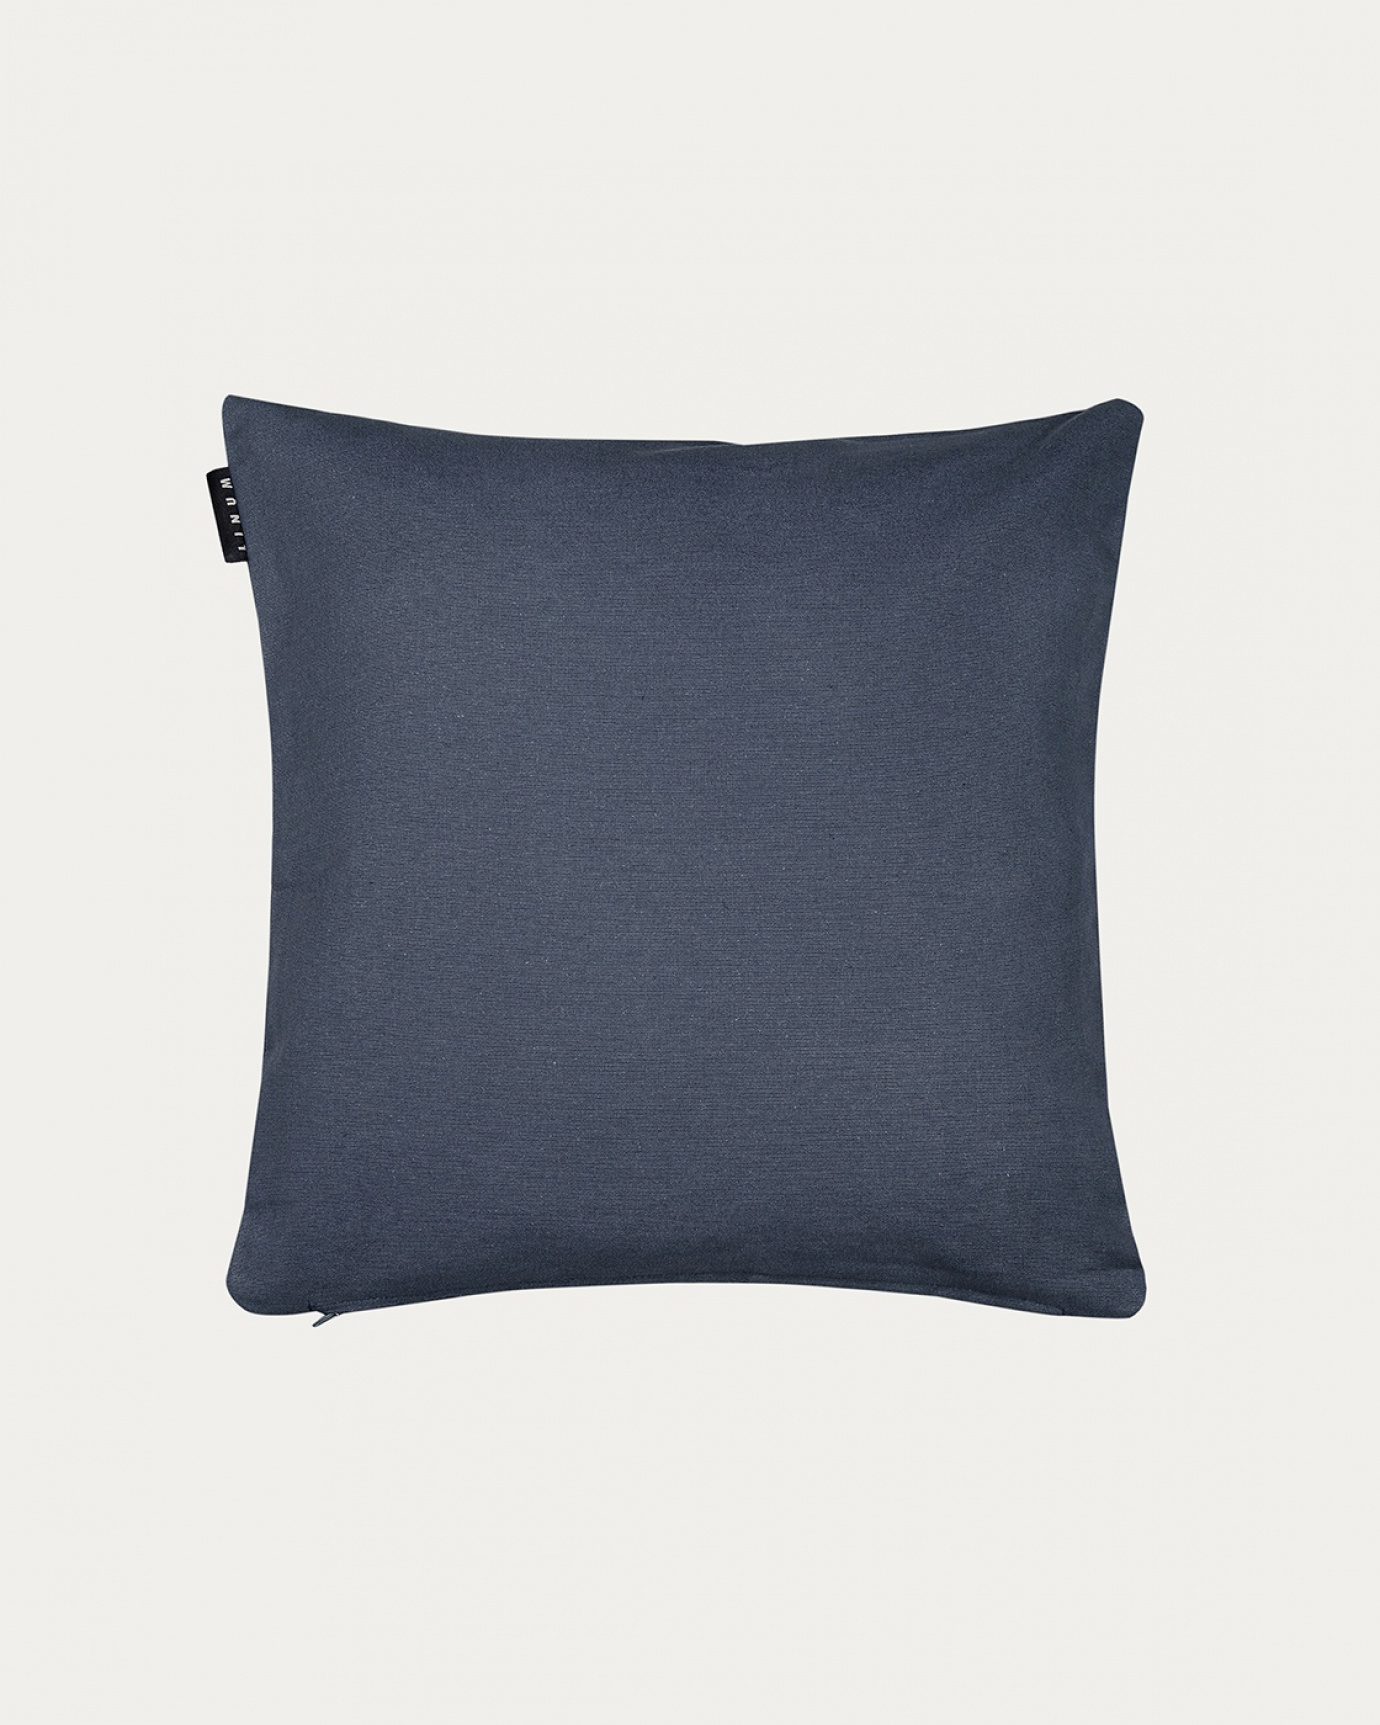 Product image dark steel blue ANNABELL cushion cover made of soft cotton from LINUM DESIGN. Size 40x40 cm.